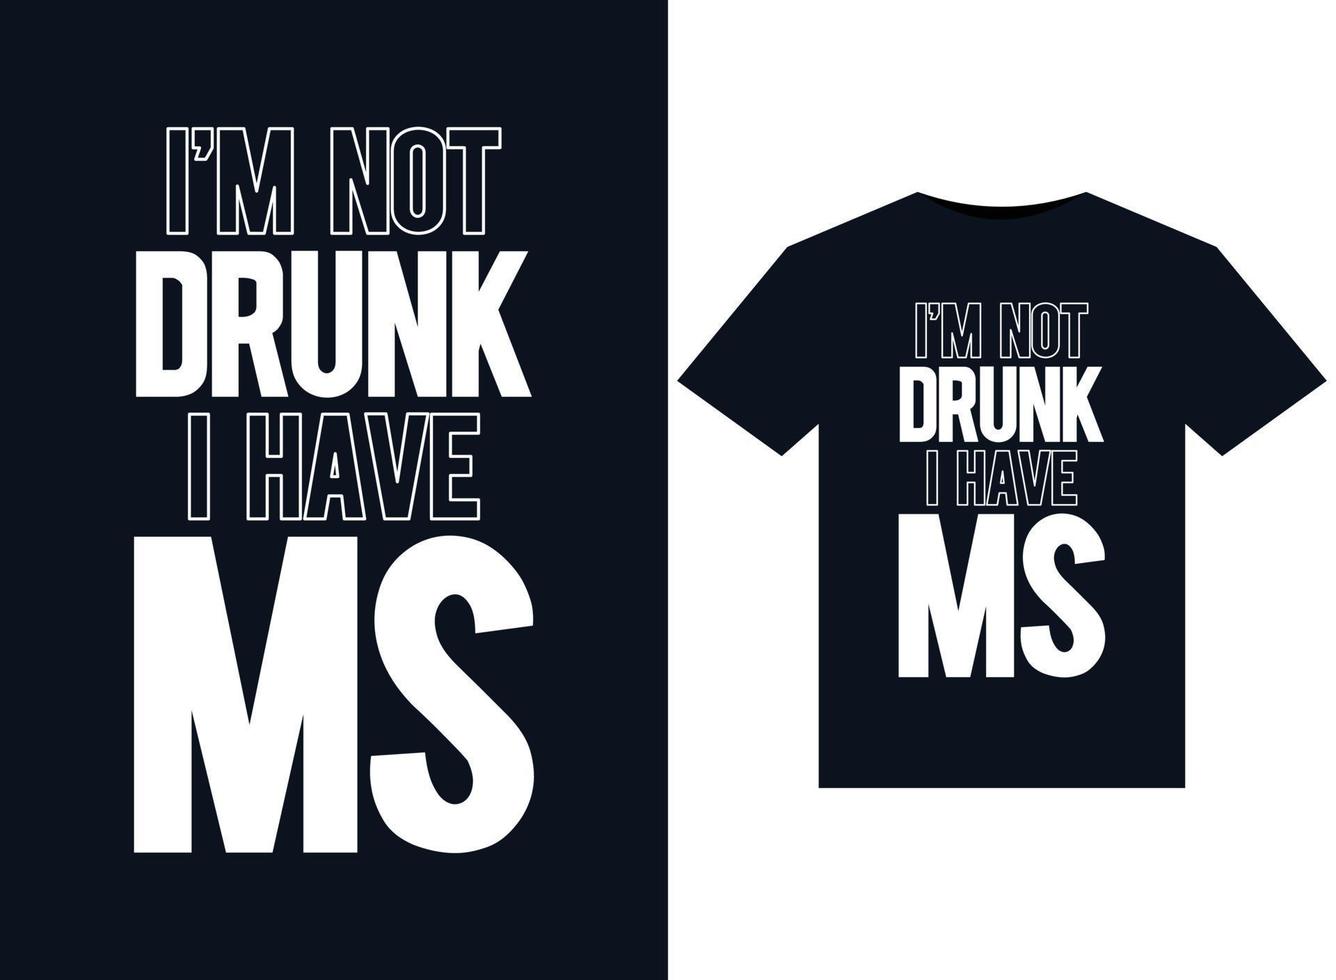 I'm Not Drunk, I have MS illustrations for print-ready T-Shirts design vector